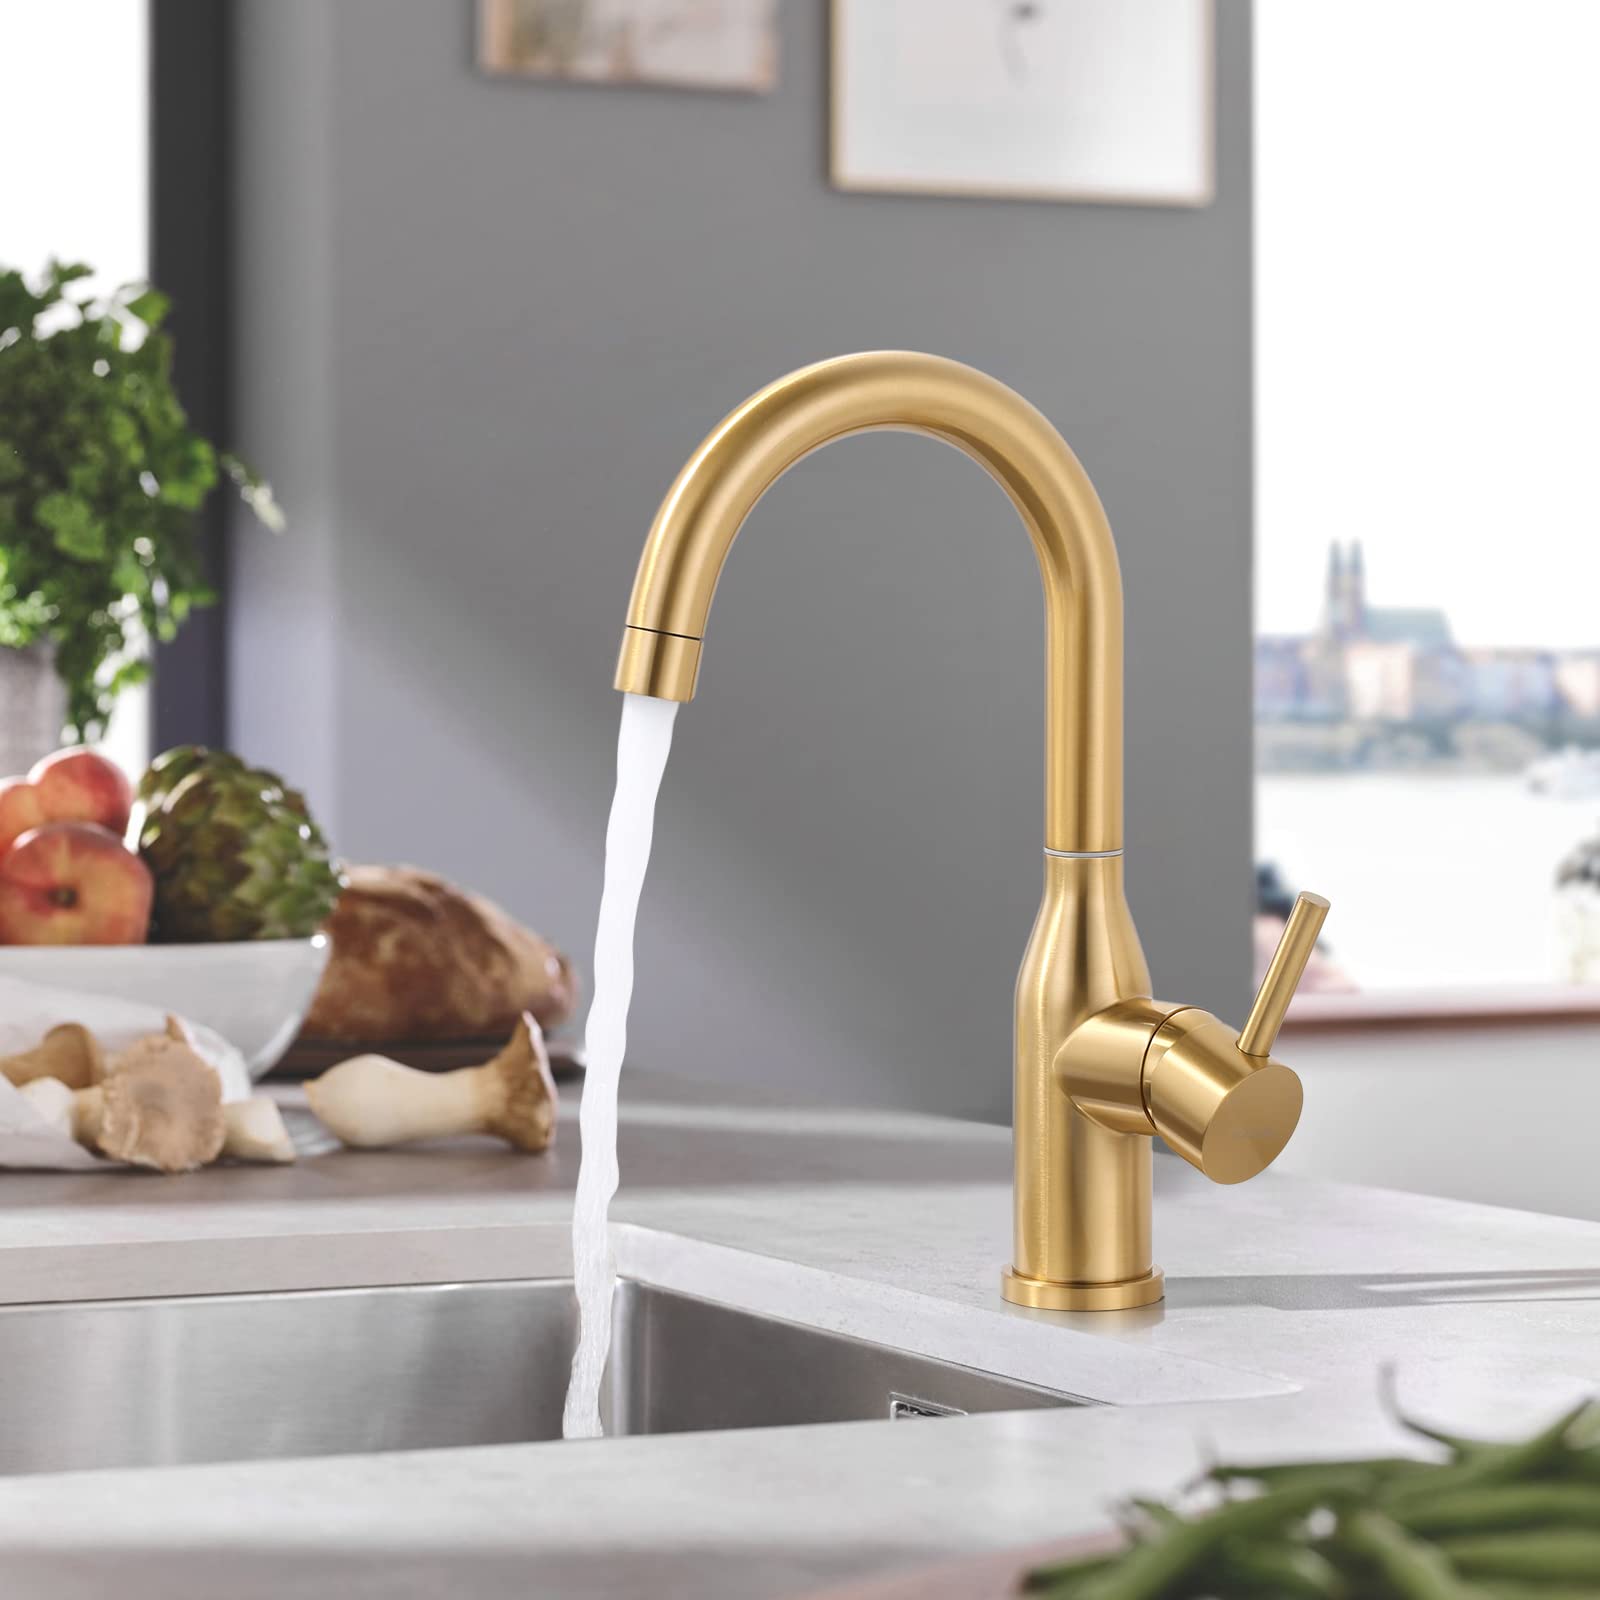 WOWOW Brushed Gold Bar Sink Faucet Single Hole Bar Faucet 1 Handle Small Kithcen Faucet for Wet Bar and RV Sink